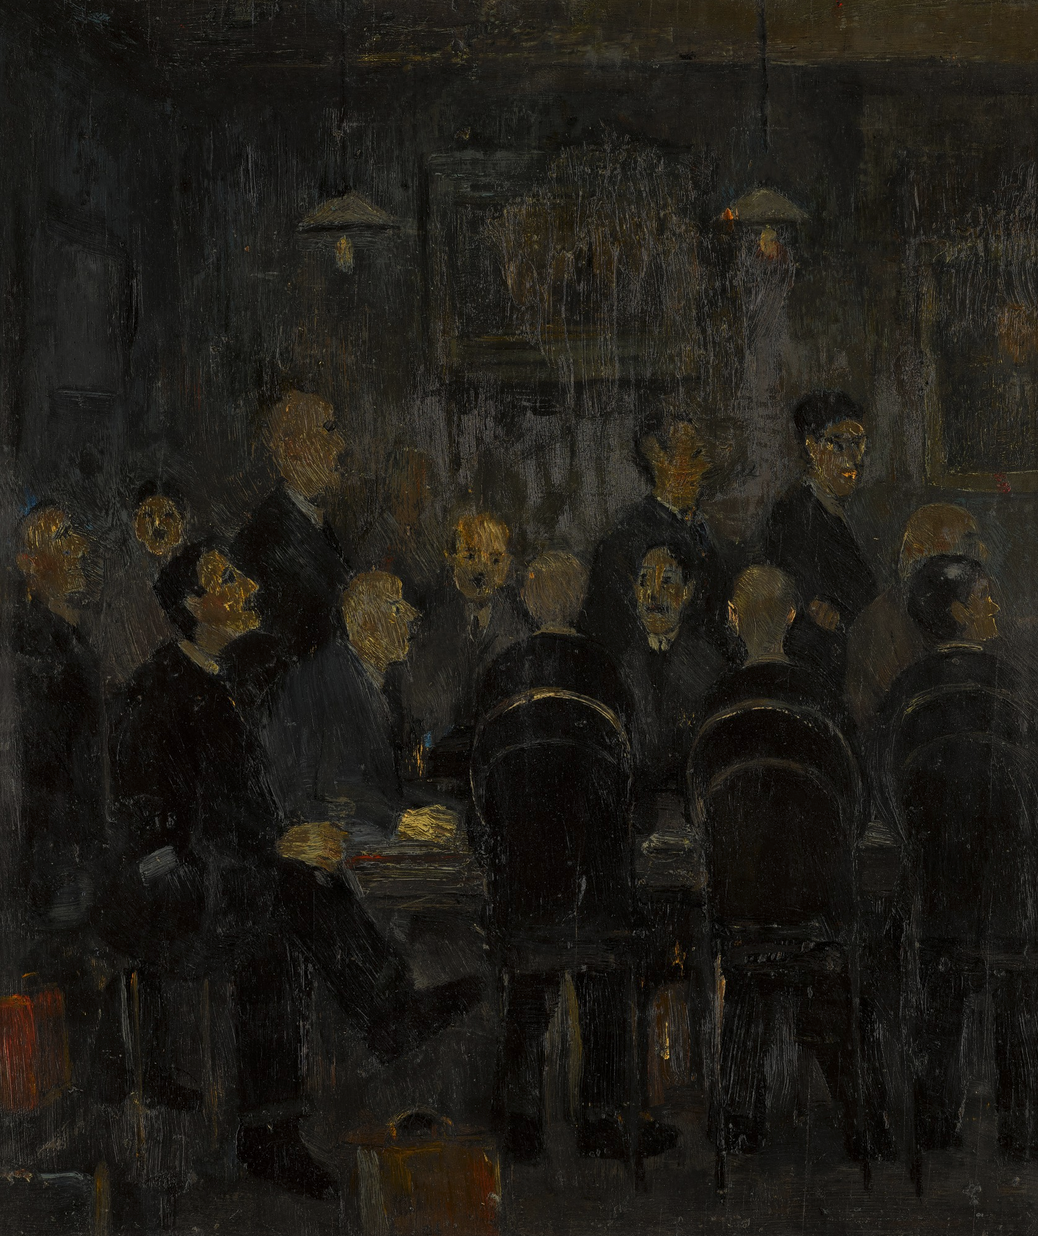 A Board Meeting (1942) by Laurence Stephen Lowry (1887 - 1976), English artist.